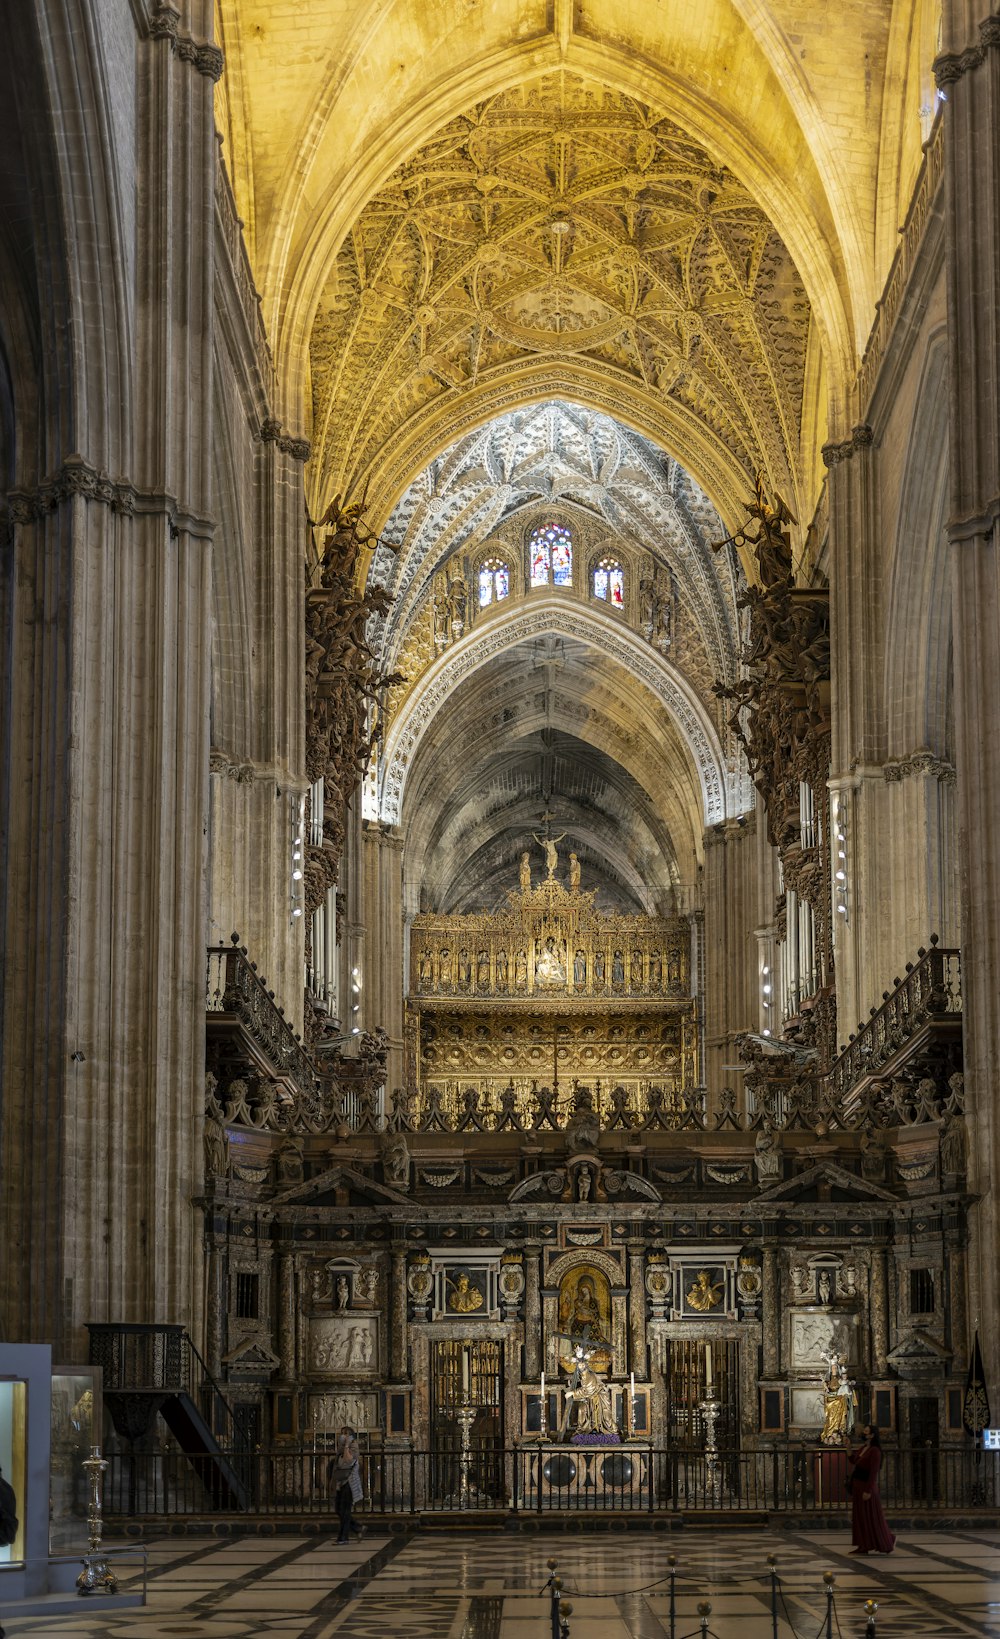 the interior of a large cathedral with high ceilings